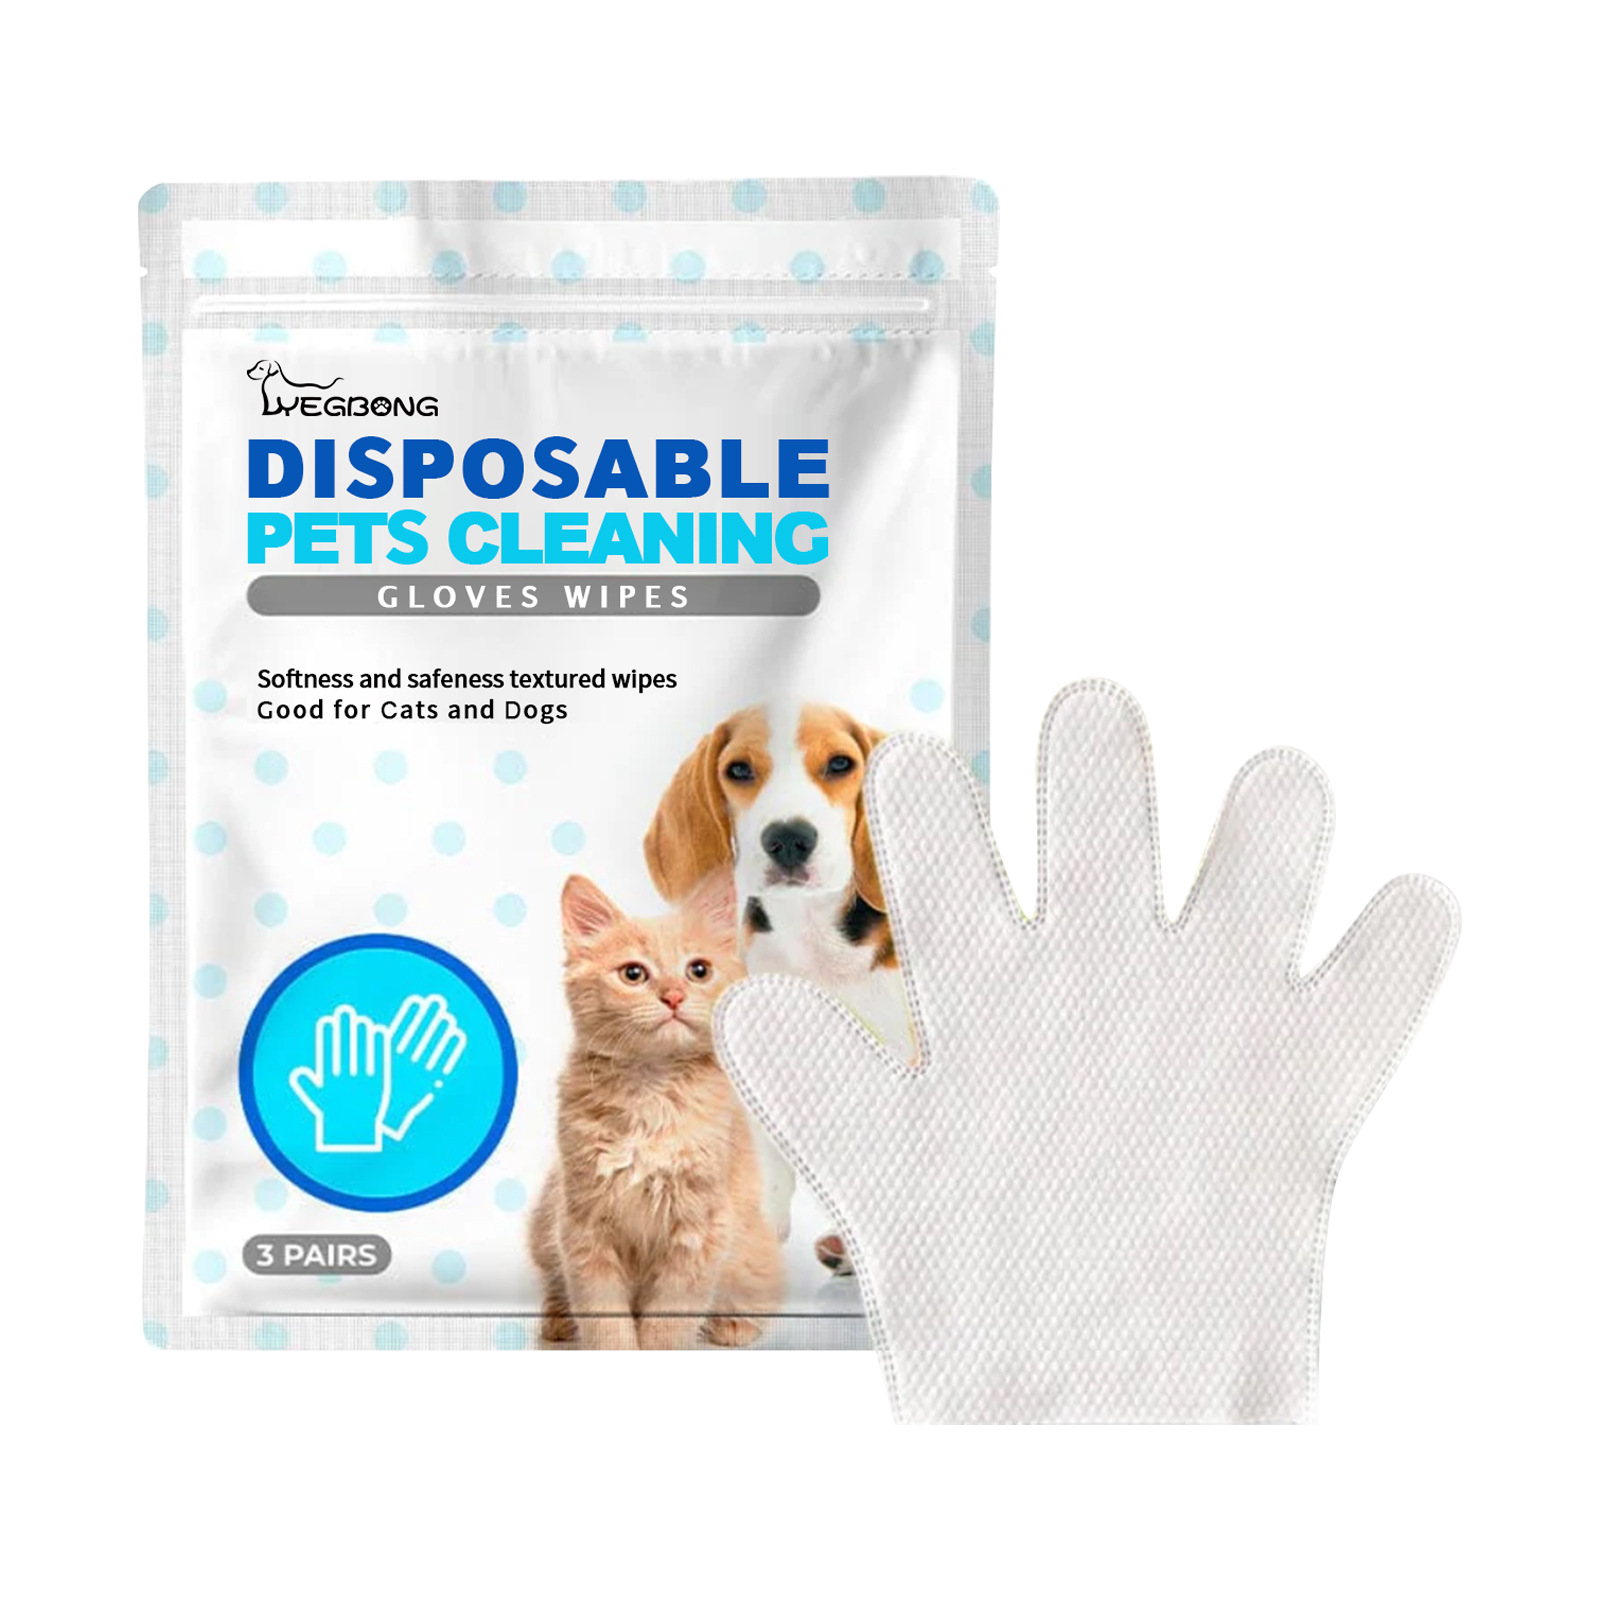 Yegbong Disposable Pet Cleaning Gloves Wipes Bath-Free Pet Cleaning Wipes Massage Bath Gloves